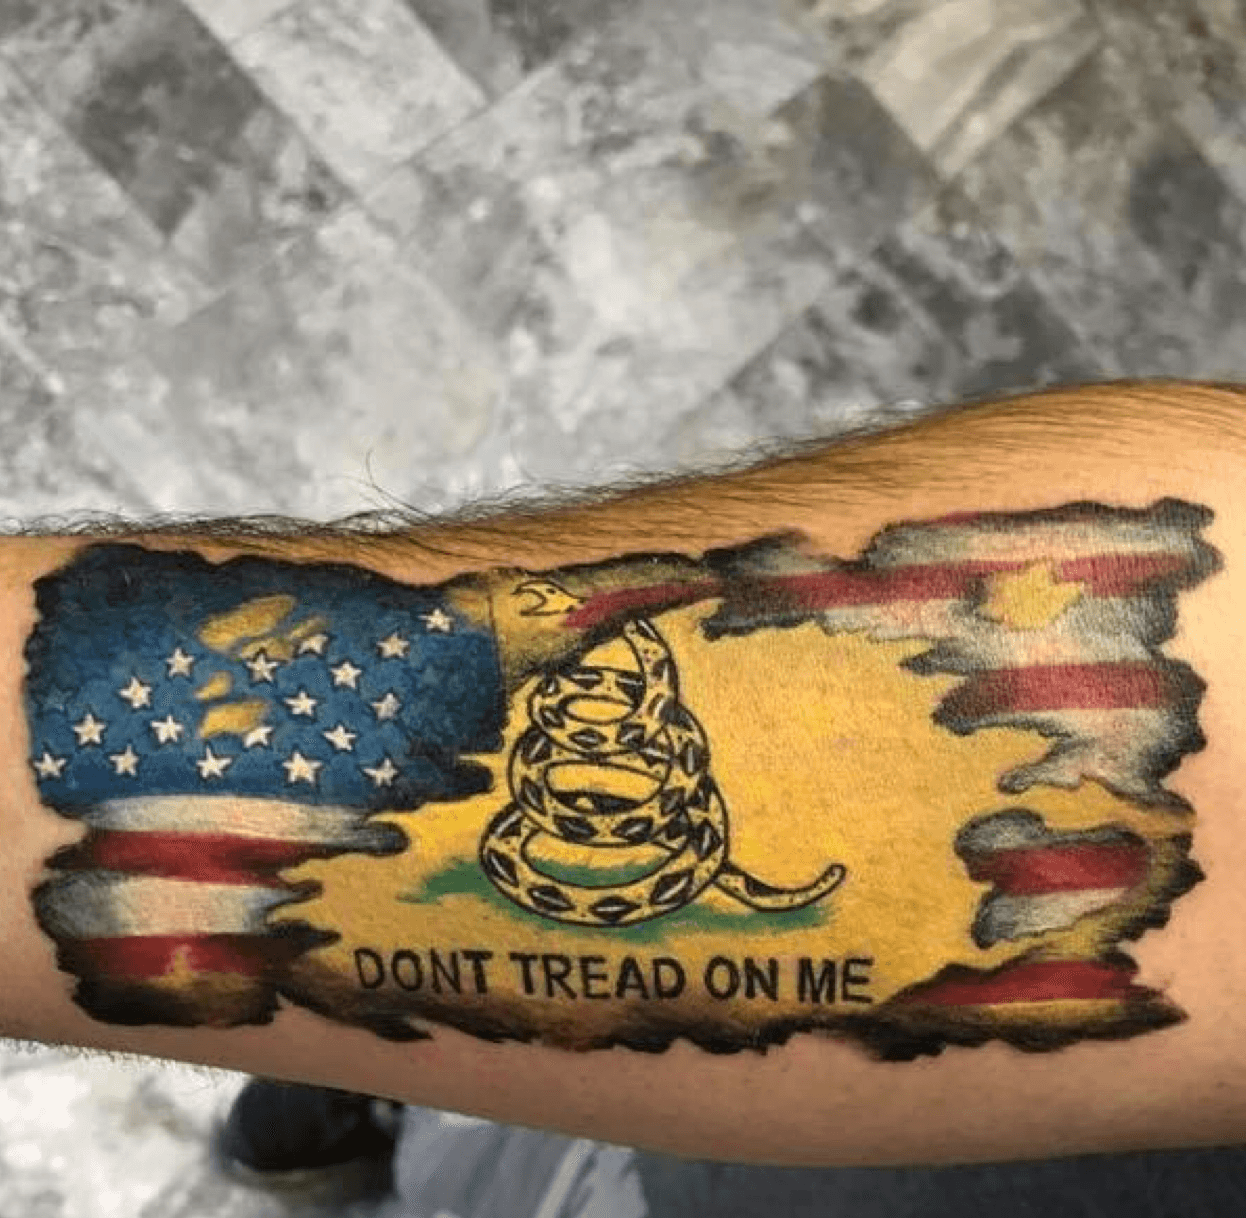 Tattoo uploaded by Charlie Connell  Dont tread on me Via Instagram  ilwolhongdam hongdam tinytattoo perfectplacement snake details  realism serpent blackink  Tattoodo